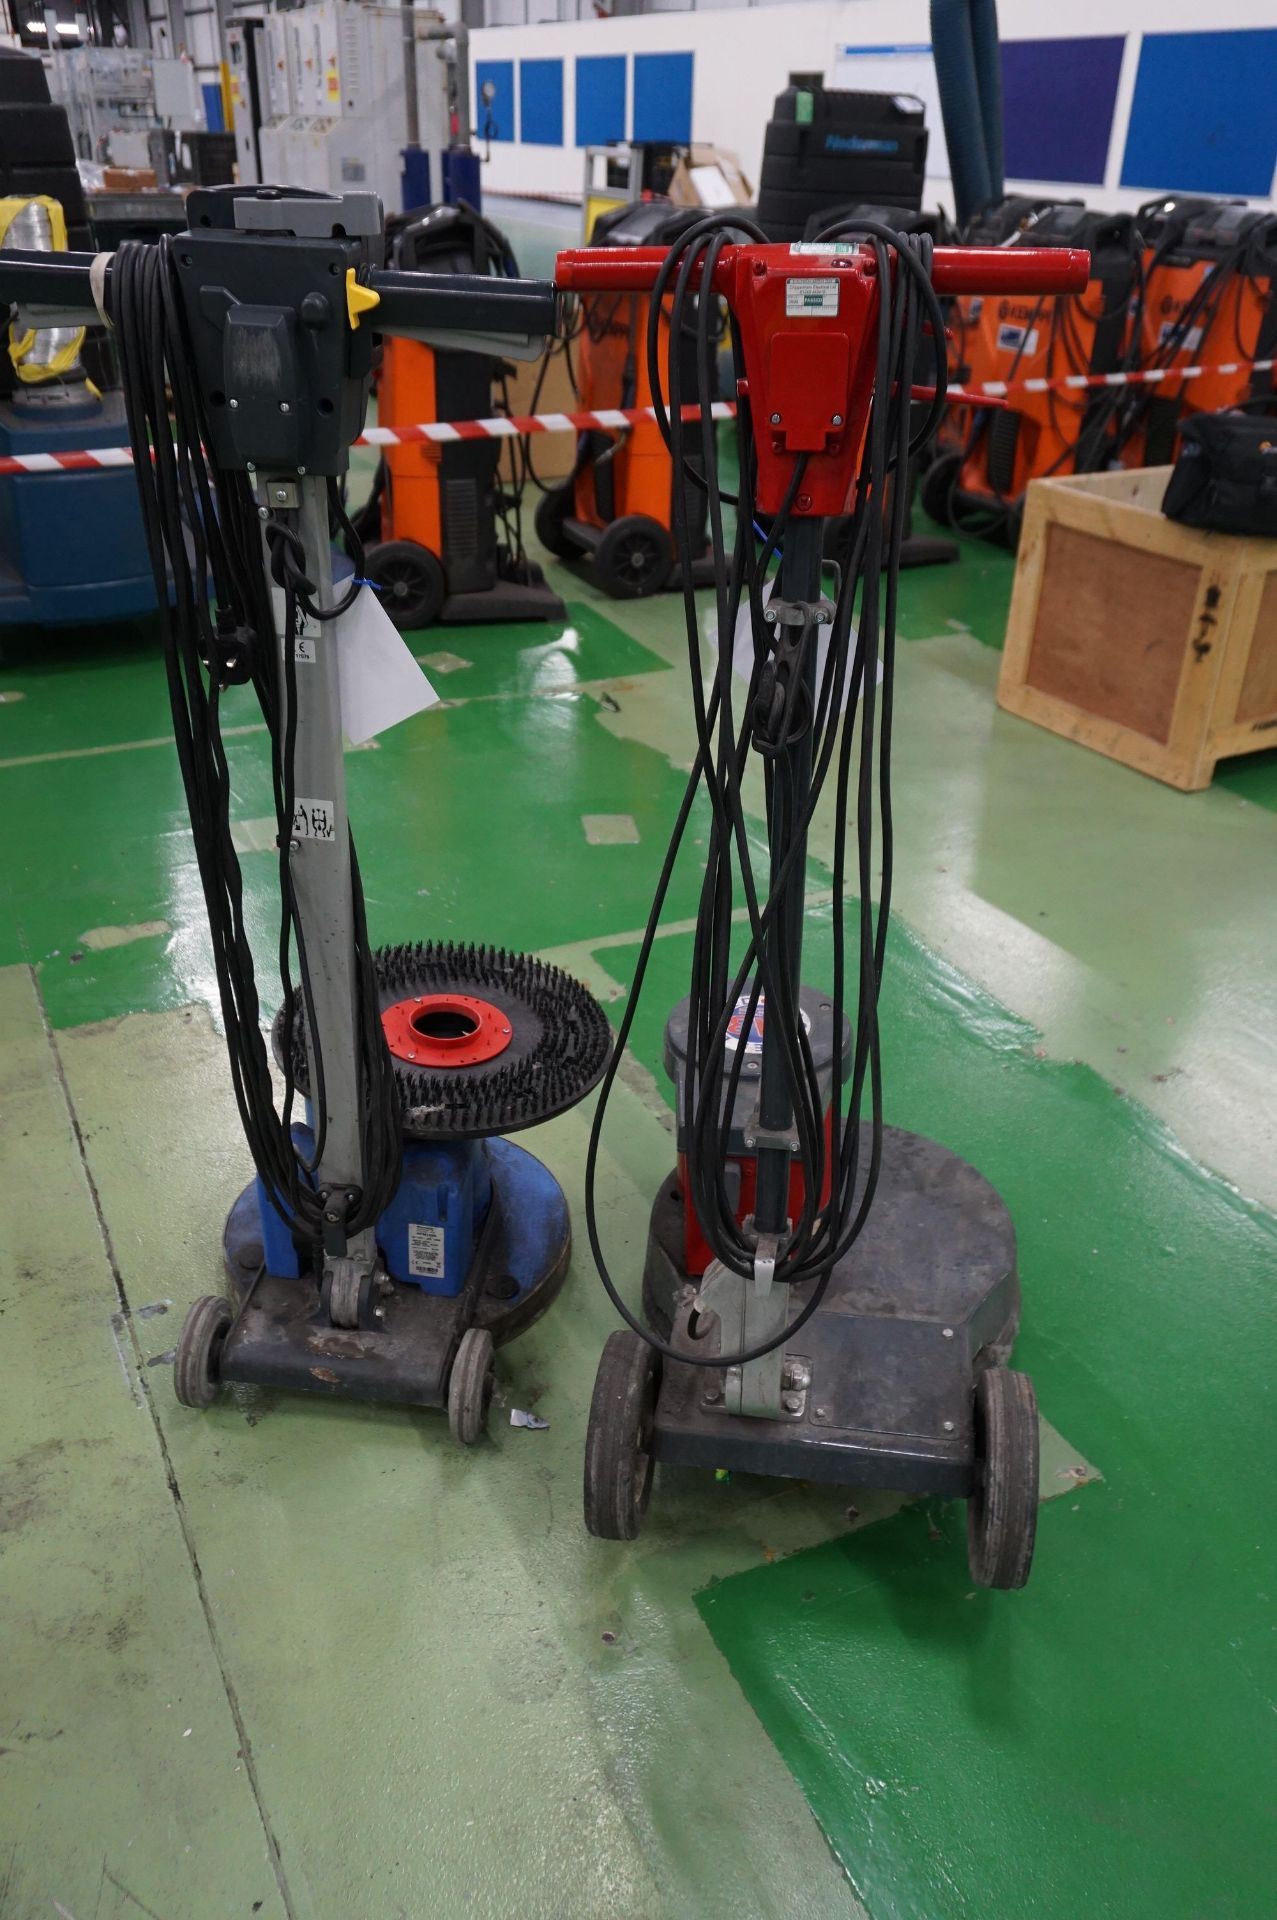 1 x A3 Machinery limited rotary floor scrubber with 1 x Numatic international rotary floor scrubber - Image 4 of 4